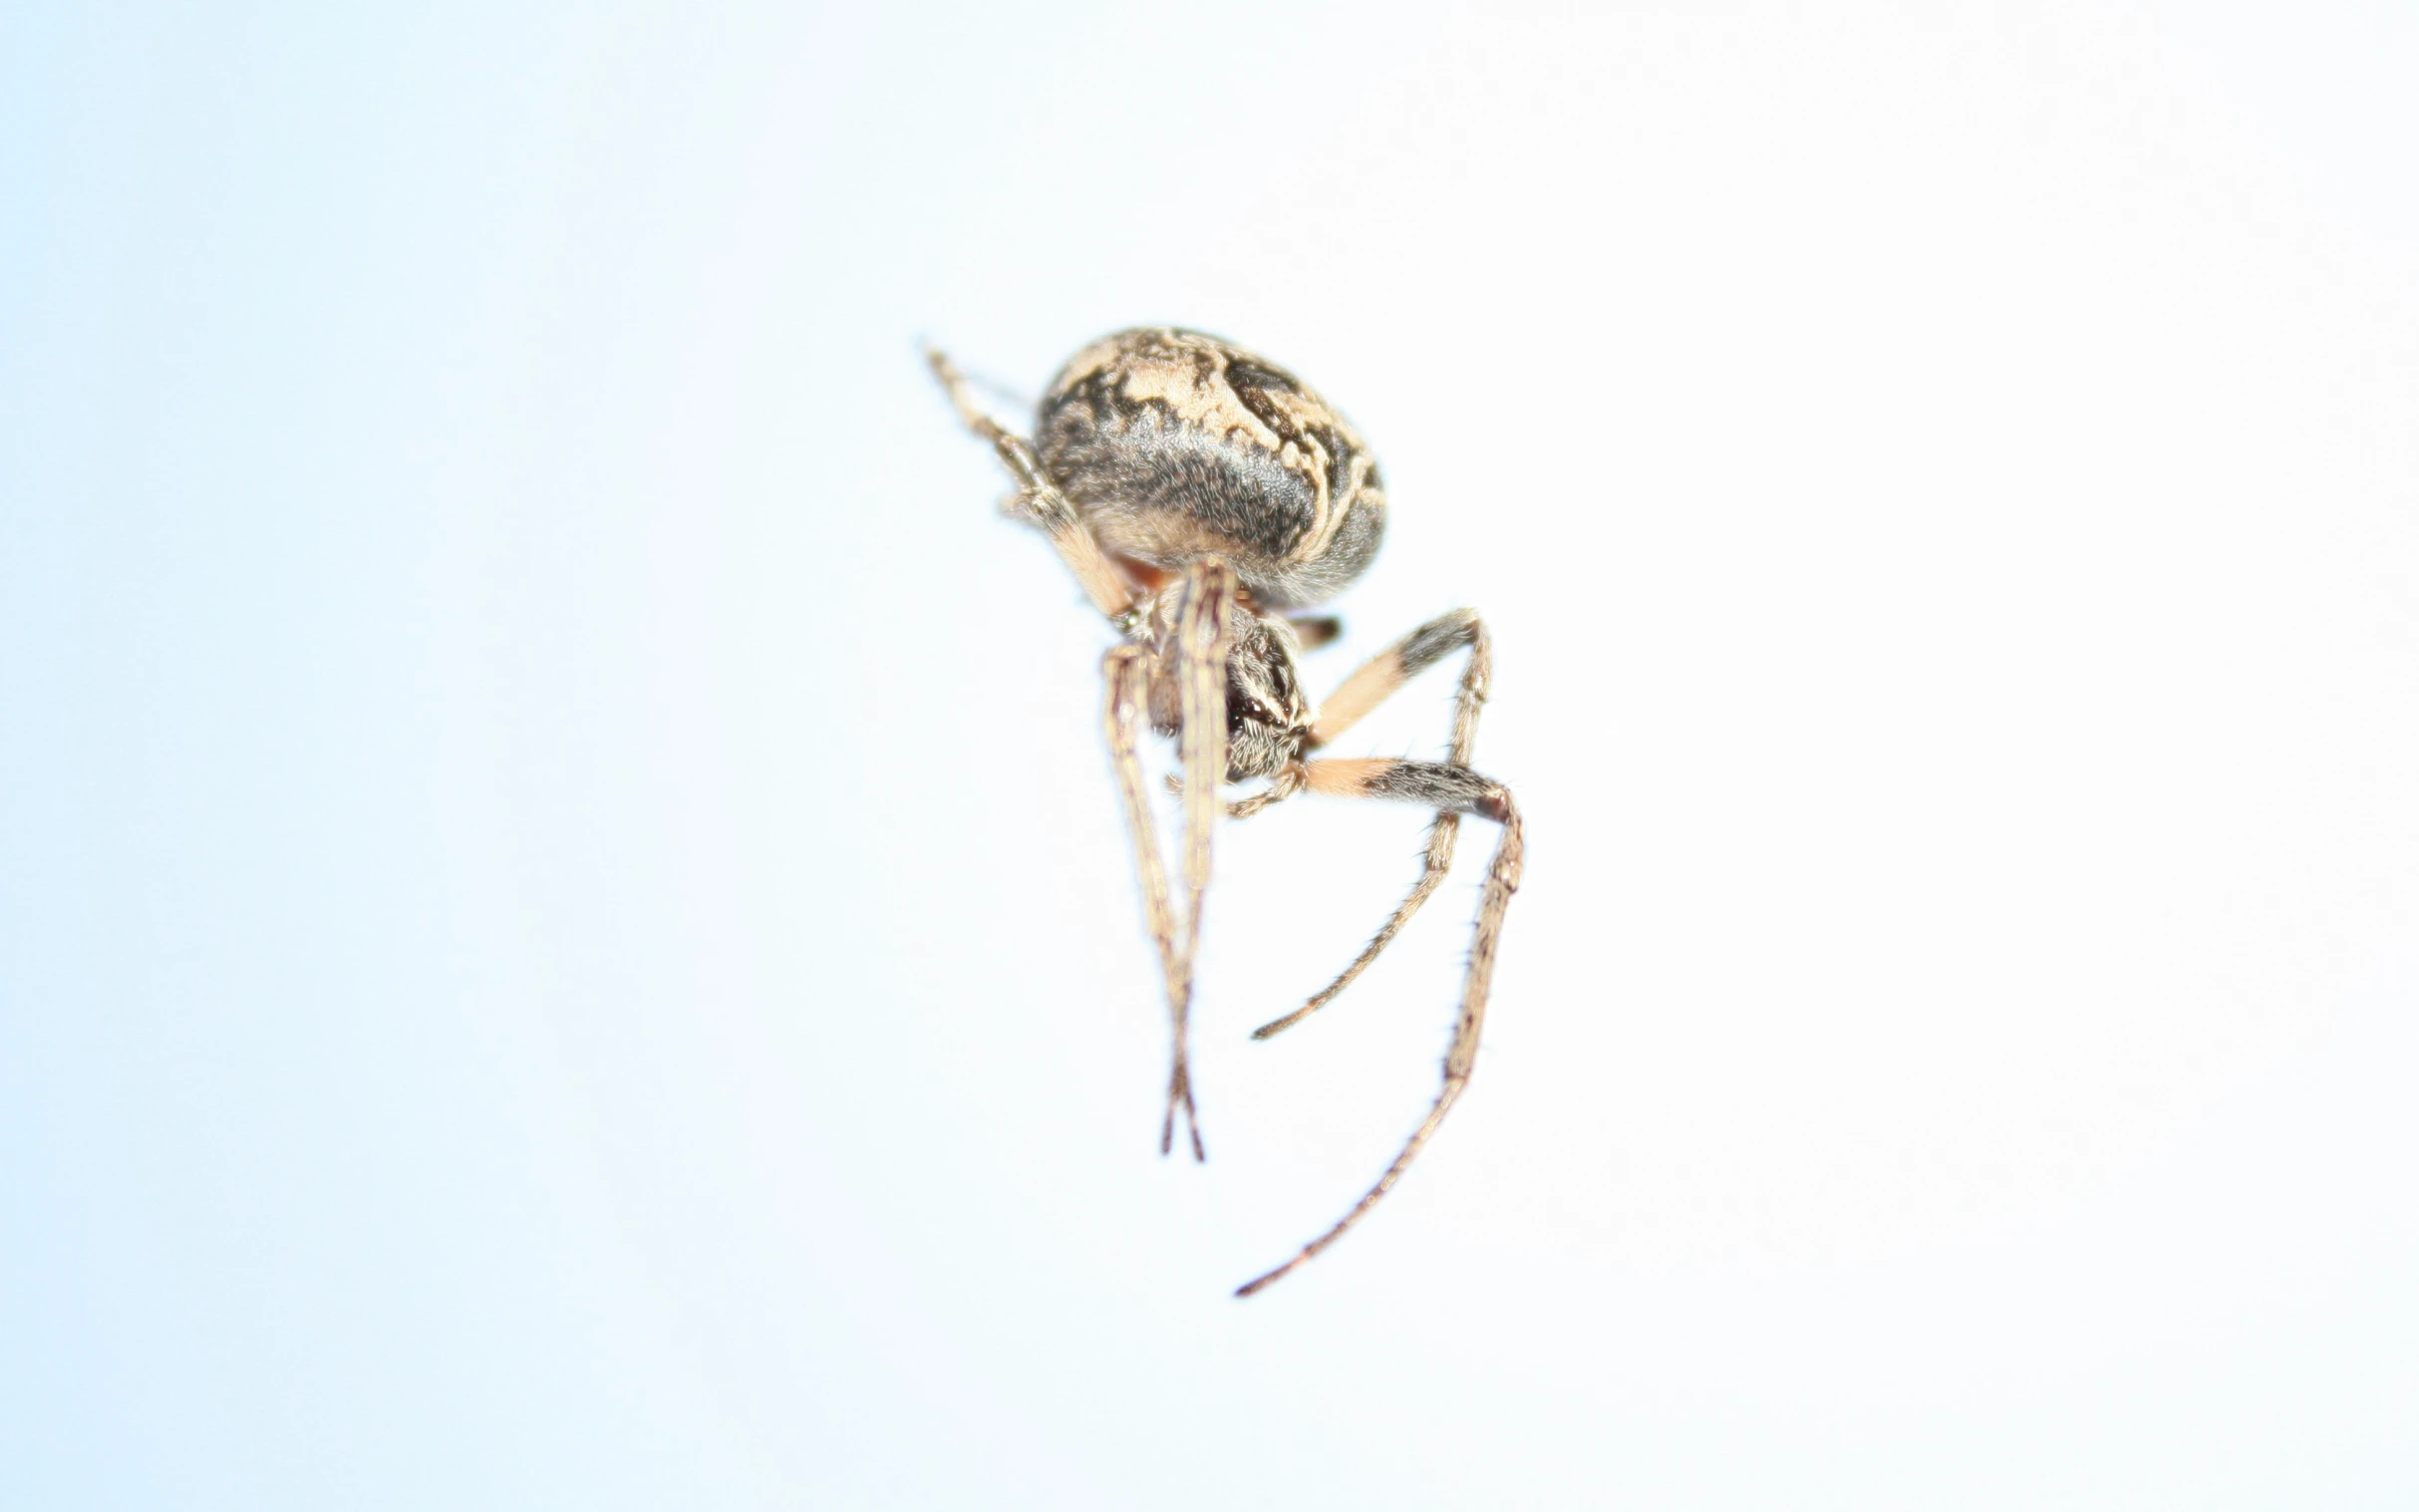 a spider with very long legs is hanging upside down